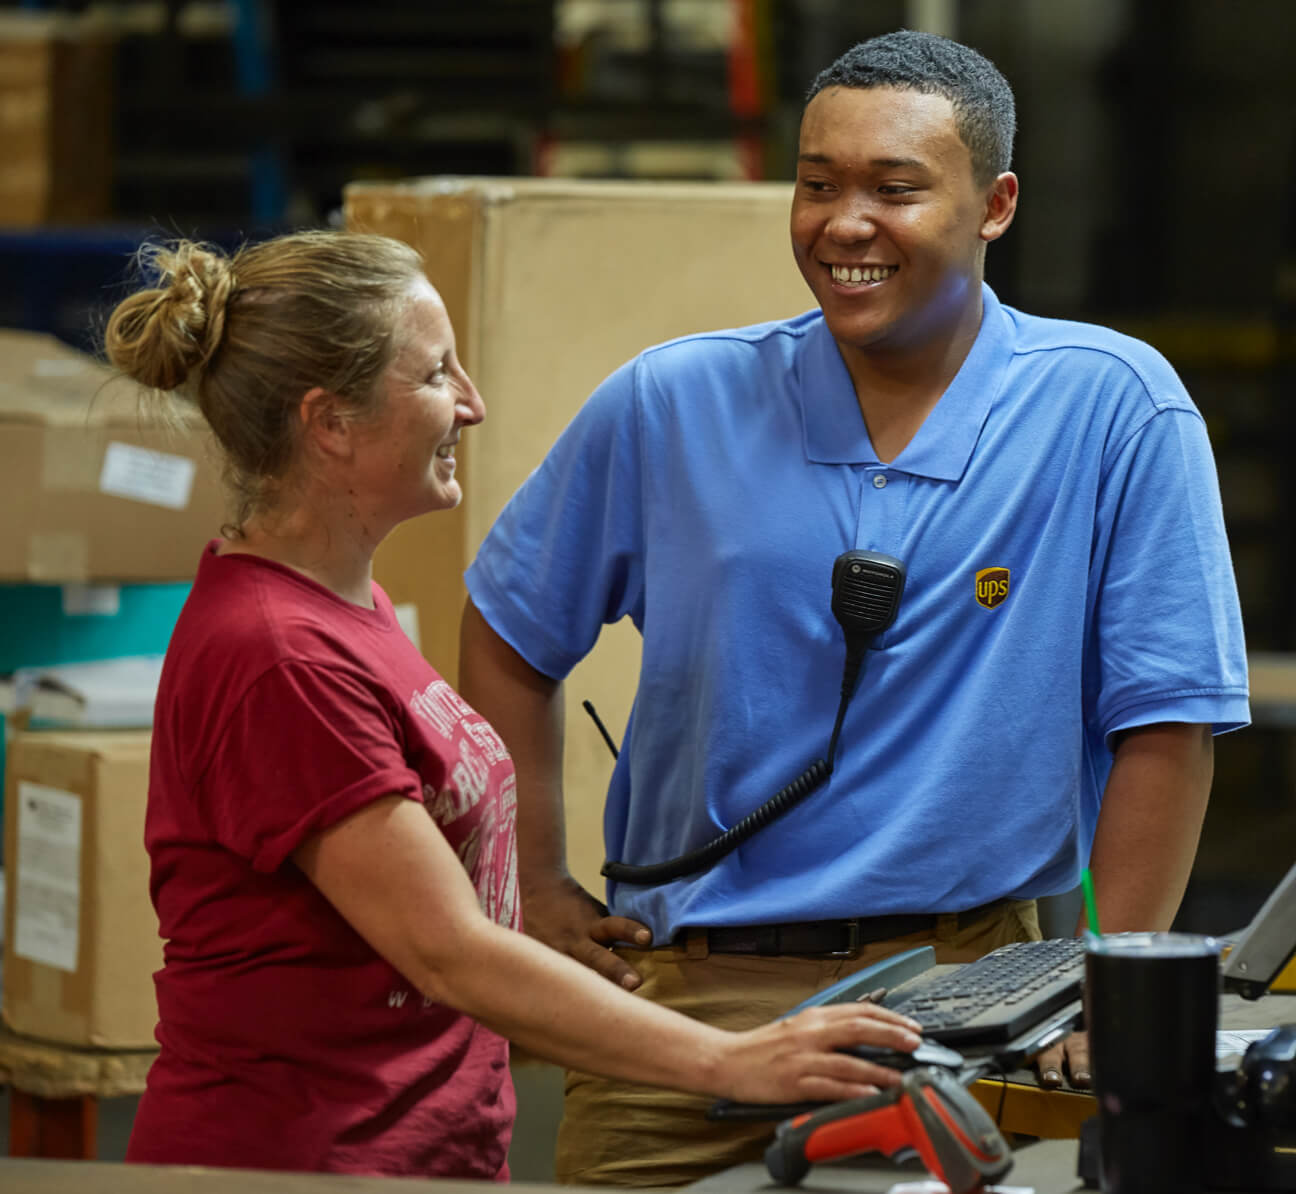 Two people chatting at a UPS warehouse